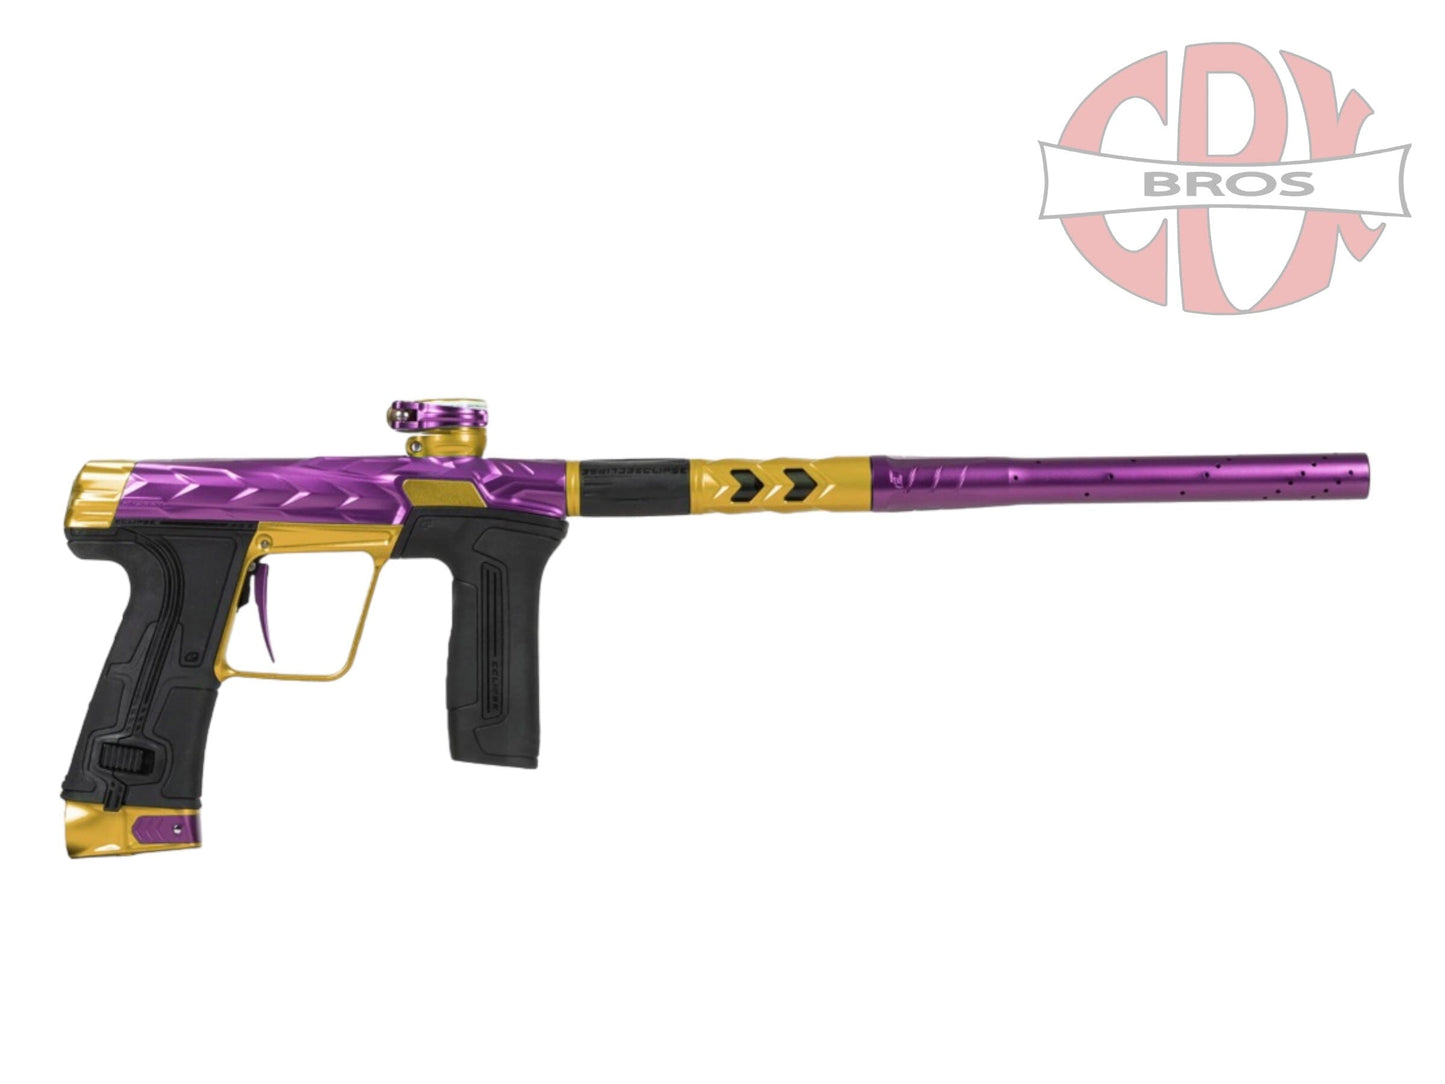 Used NEW HK FOSSIL - ECLIPSE CS3 - Royalty Paintball Gun from CPXBrosPaintball Buy/Sell/Trade Paintball Markers, New Paintball Guns, Paintball Hoppers, Paintball Masks, and Hormesis Headbands